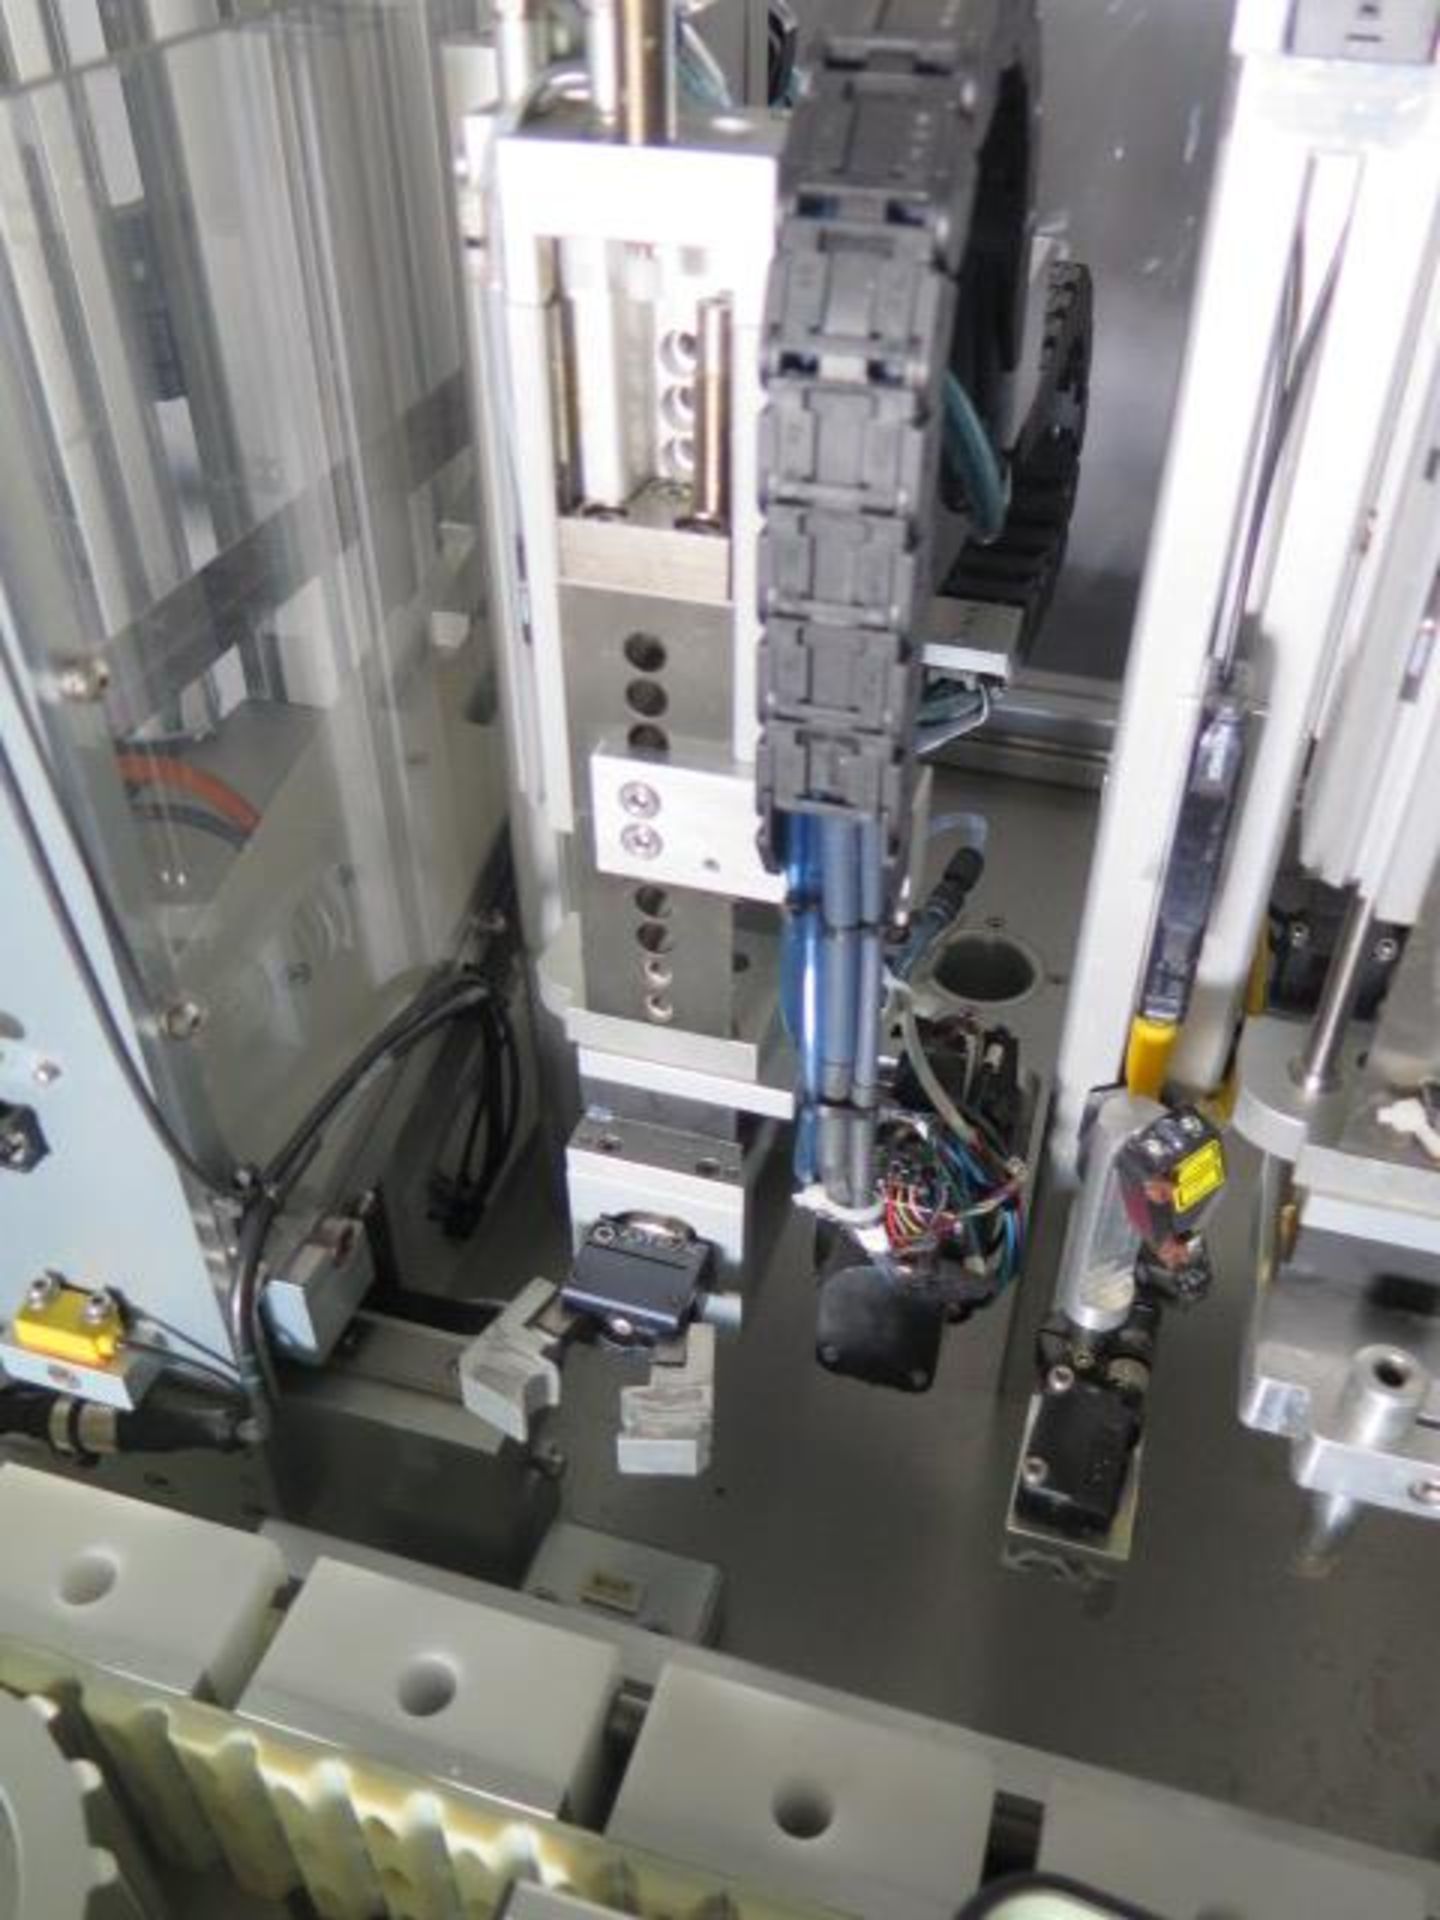 Automated Vitamin D Machine Line w/ PLC Controls, Tube and Cap Feeders, Enclosure SOLD AS-IS - Image 8 of 20